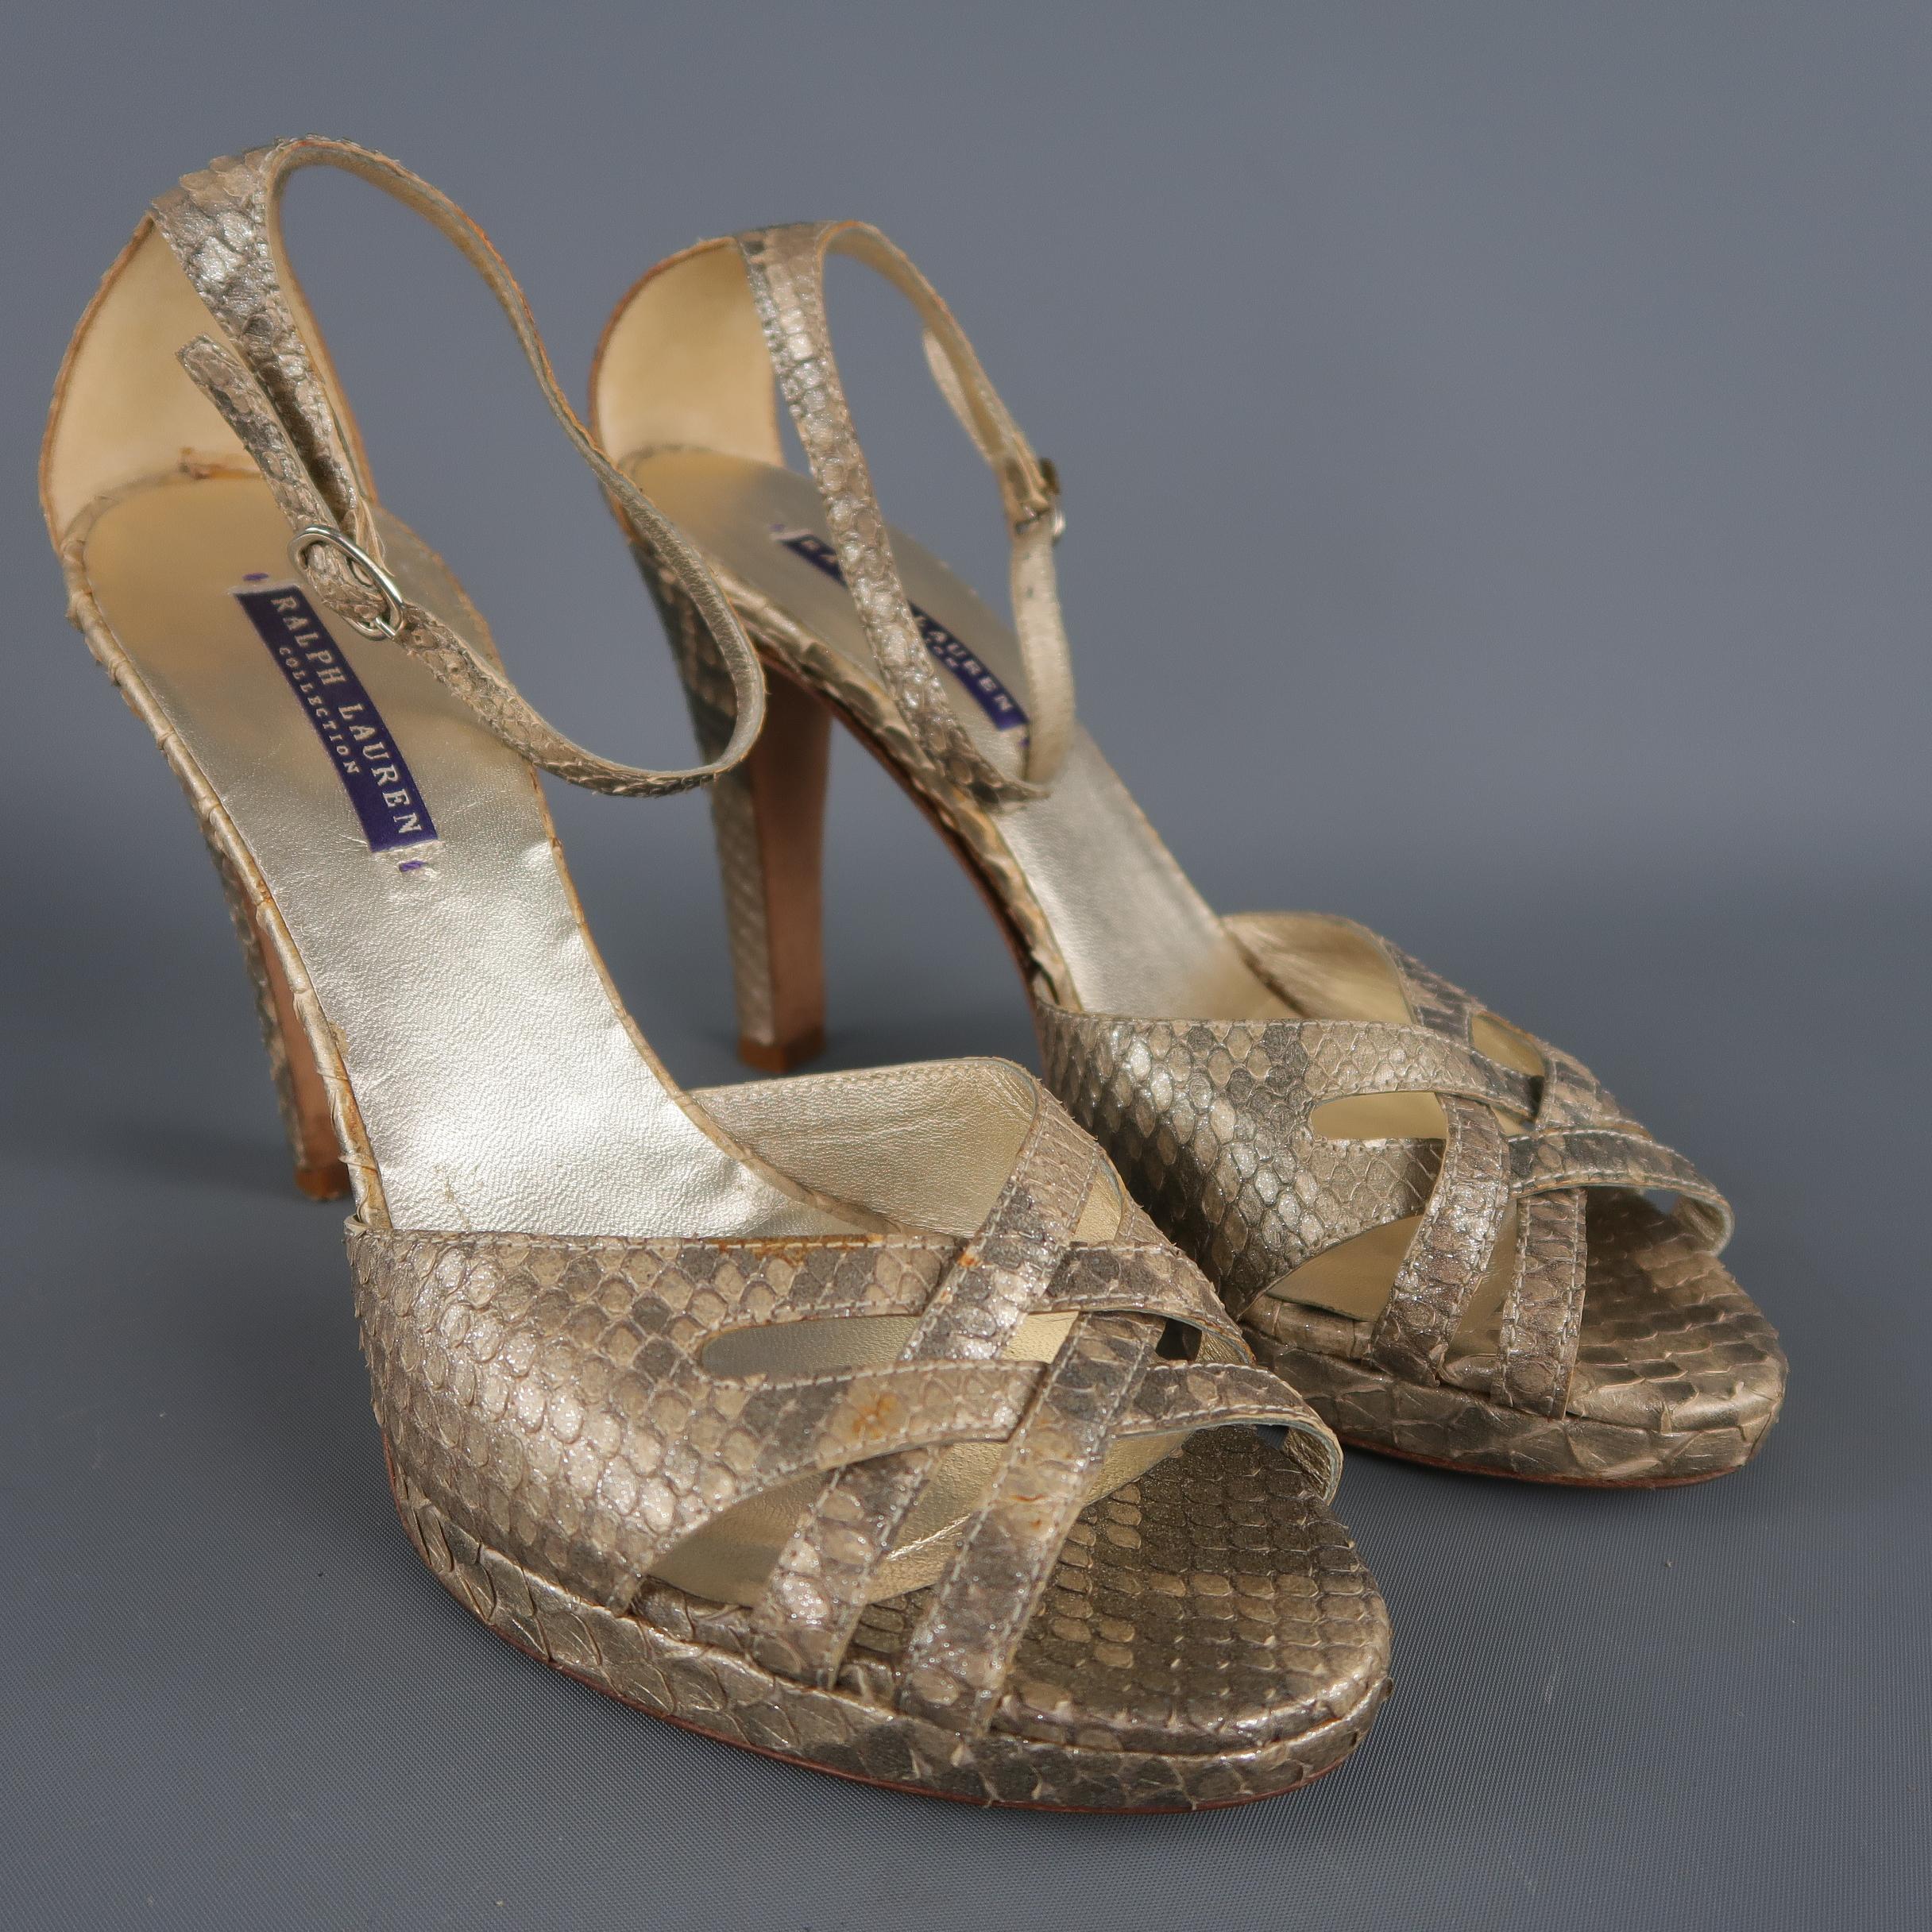 RALPH LAUREN COLLECTION sandals come in sparkly metallic python skin leather with woven toe straps, covered heel and platform, and ankle strap. Wear throughout. As-is. Made in Italy.
 
Good Pre-Owned Condition.
Marked: 9 B
 
Measurements:
 
Heel: